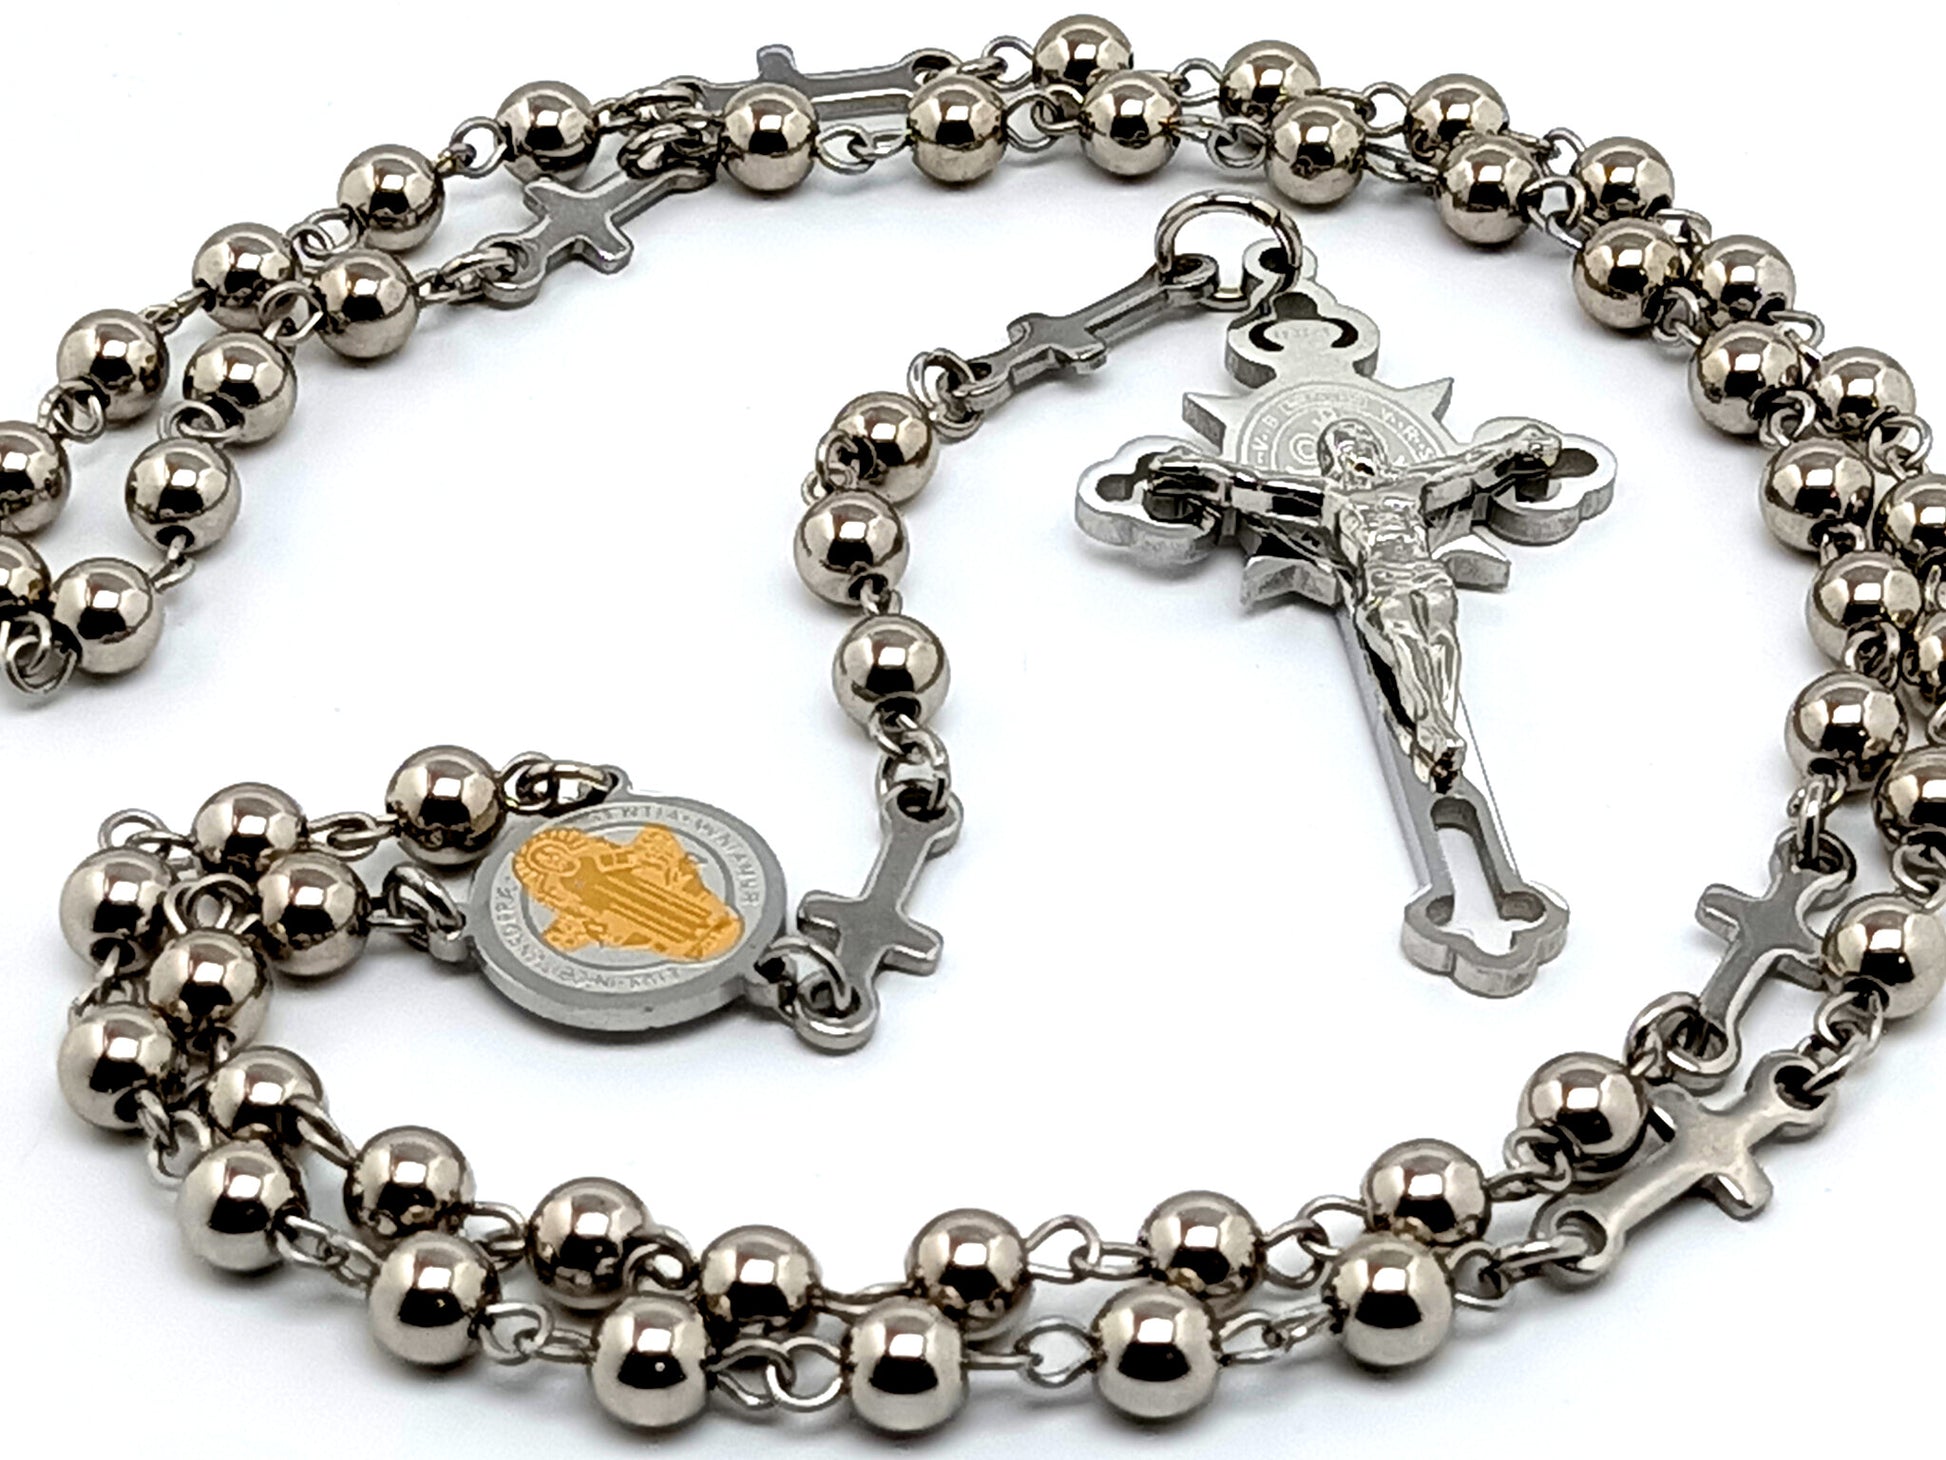 Saint Benedict unique rosary beads with stainless steel and linking cross beads and Saint Benedict stainless steel crucifix.